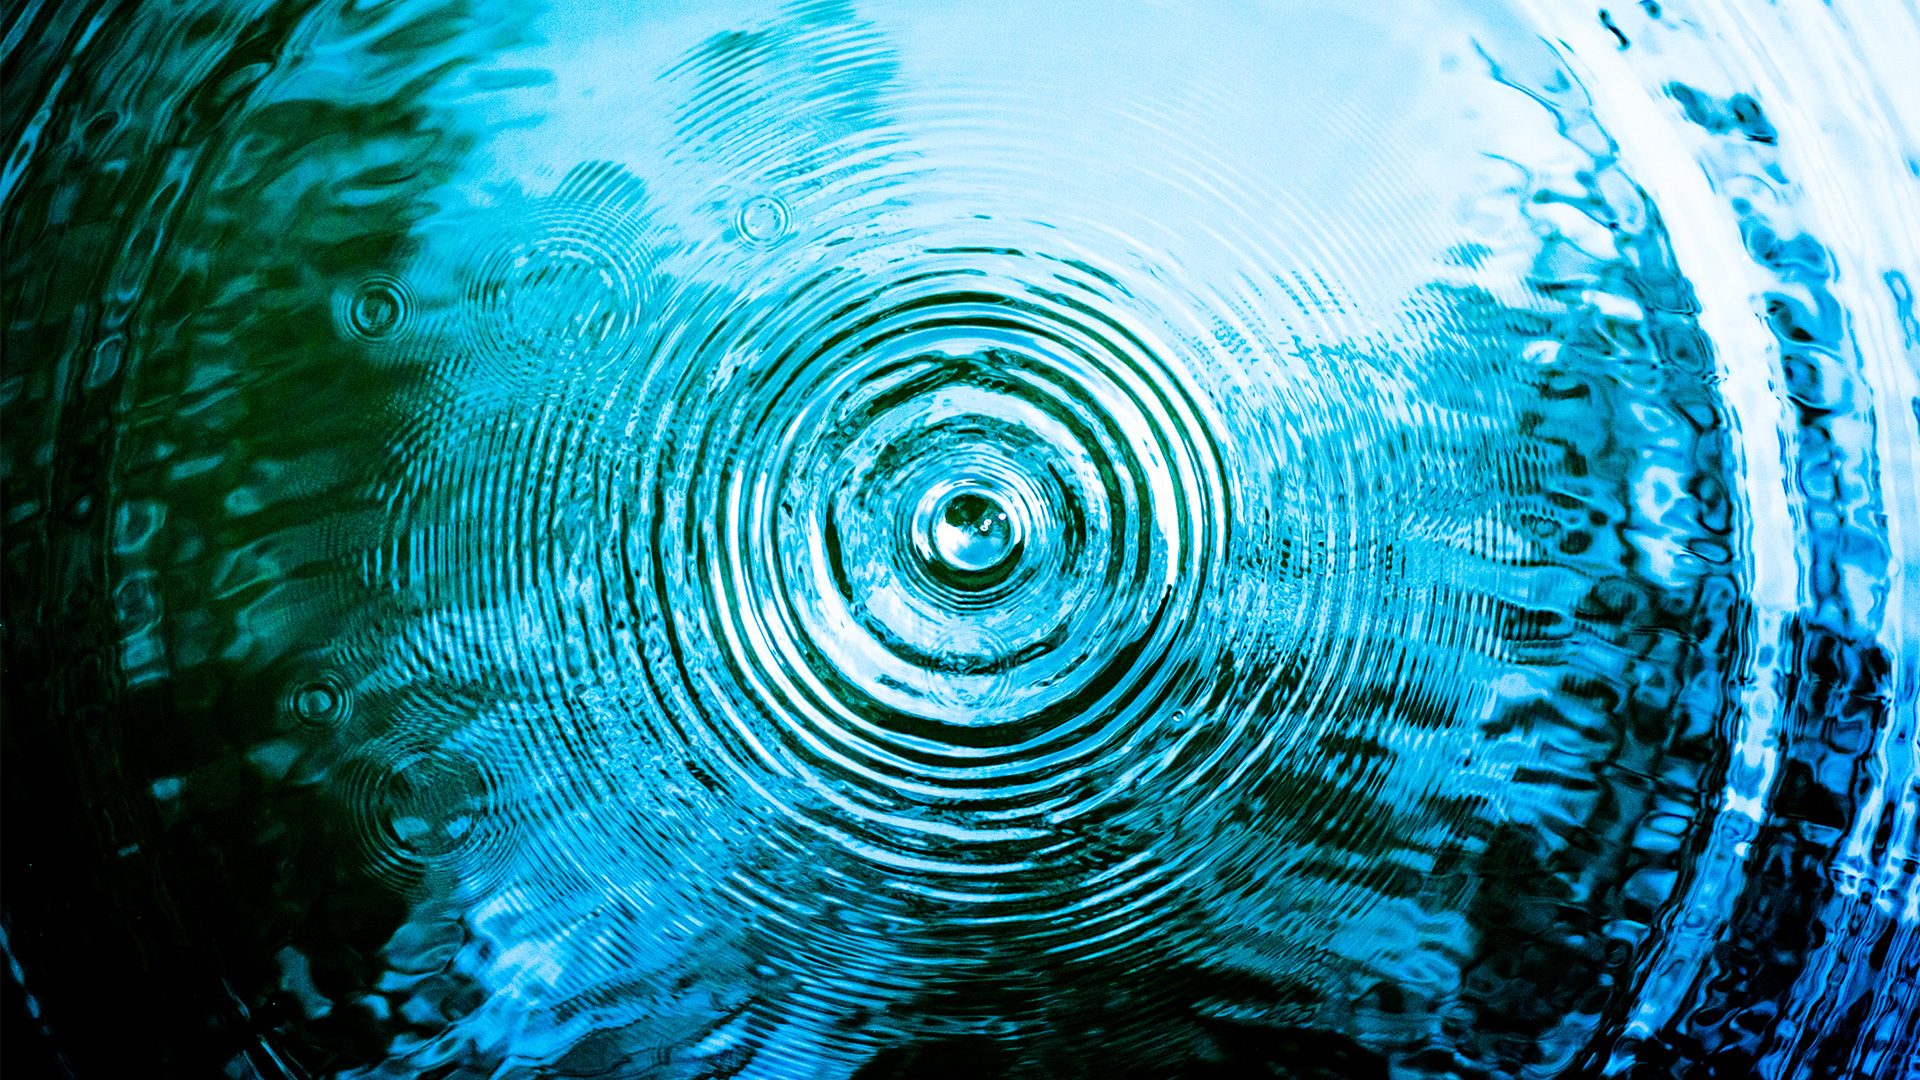 Top view of a ripple in water